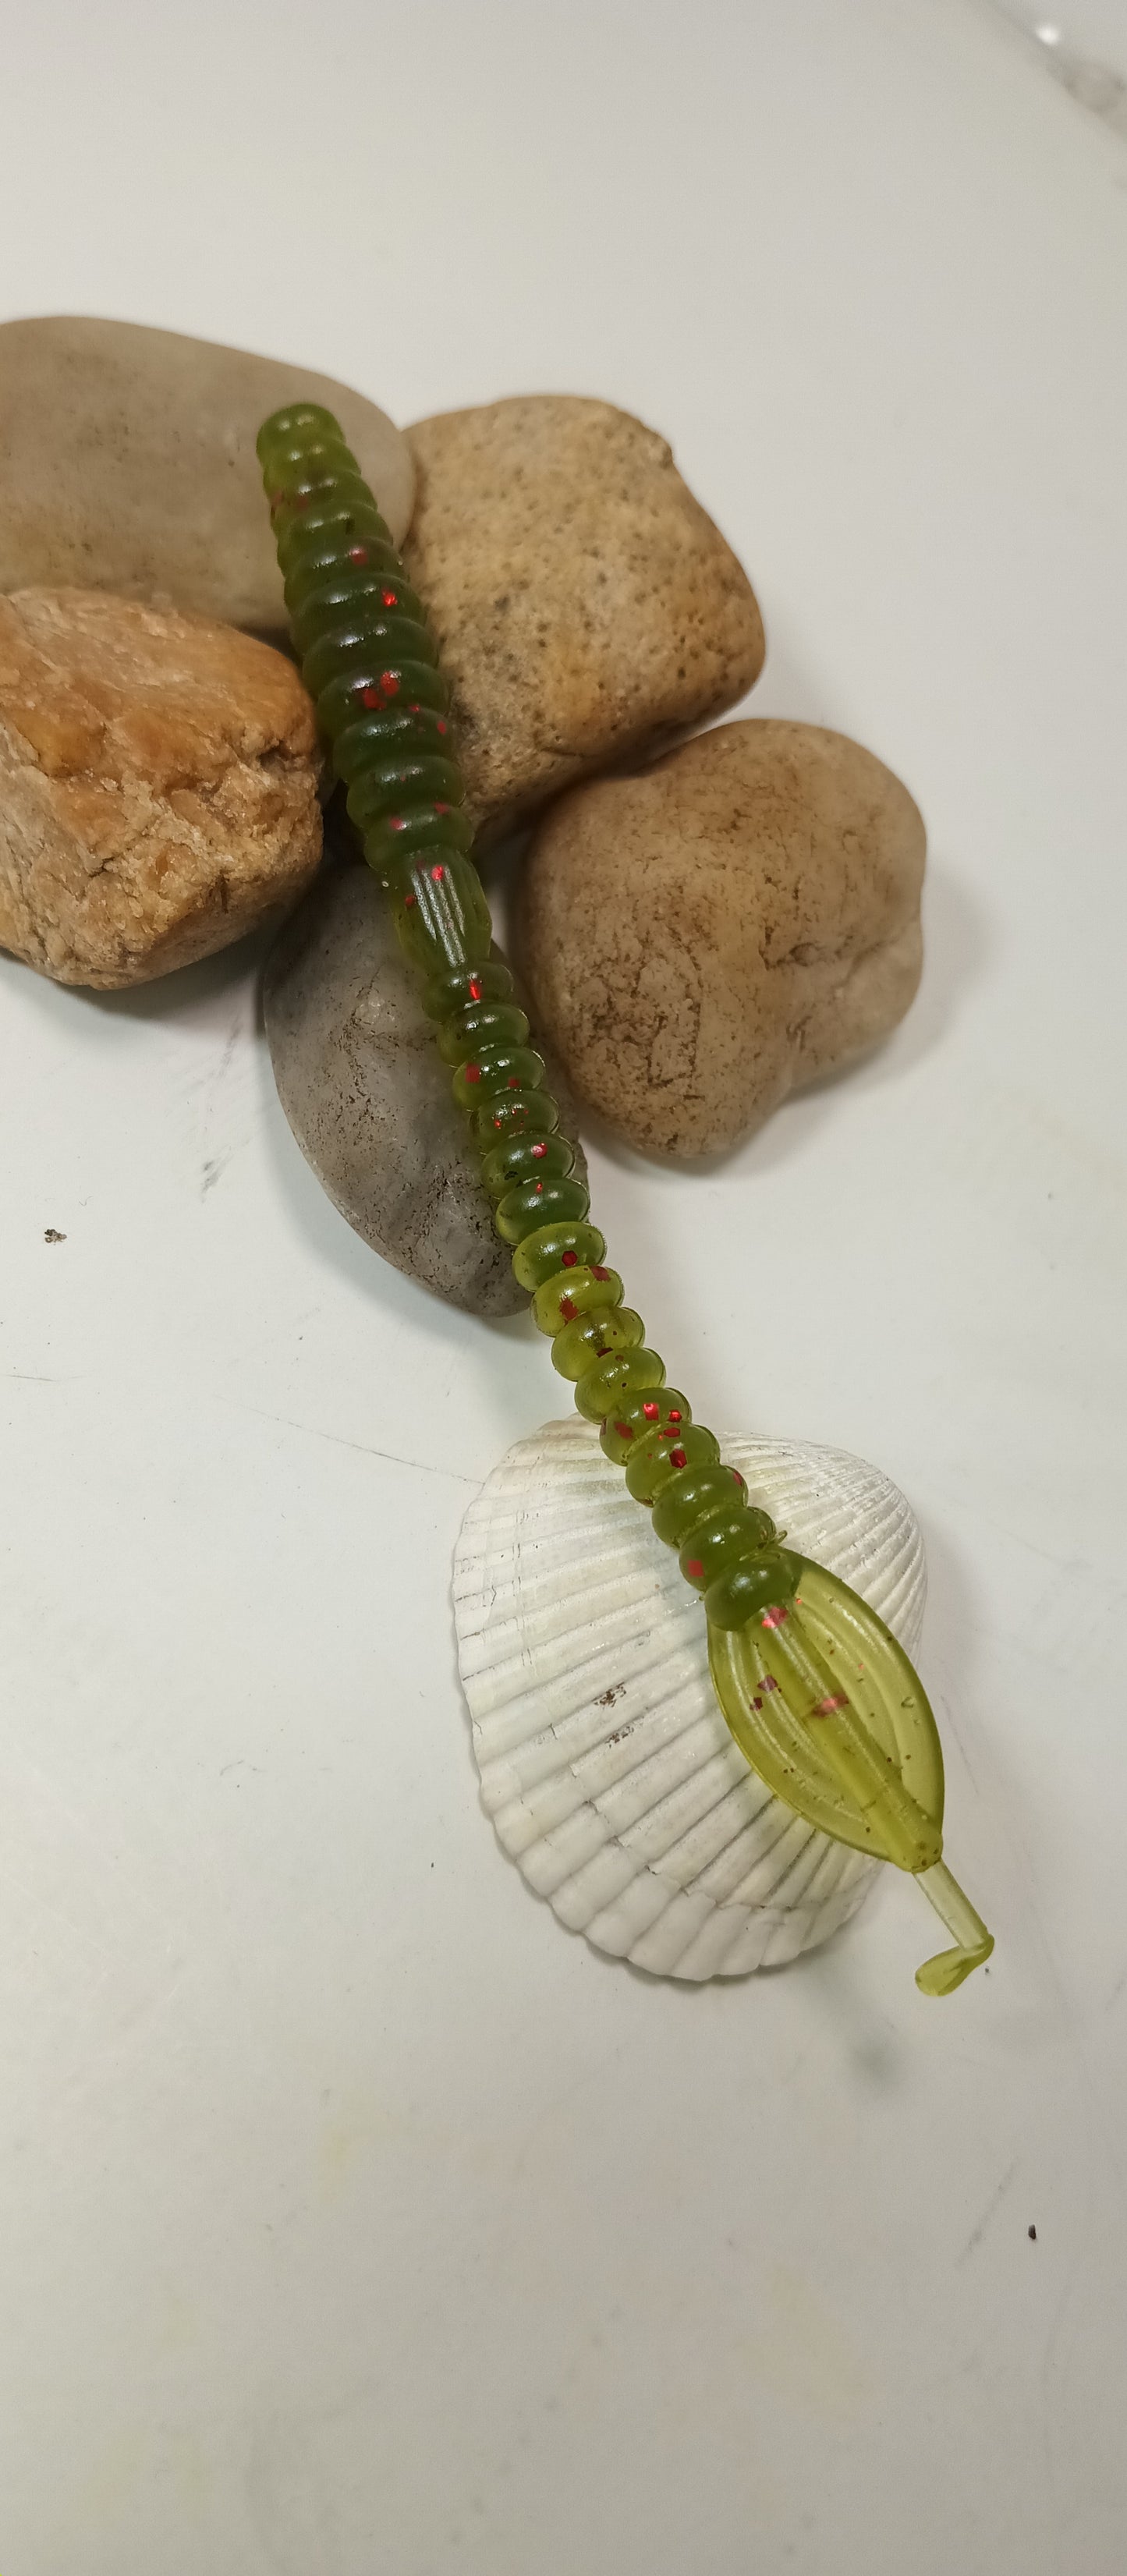 4 " Finesse worm